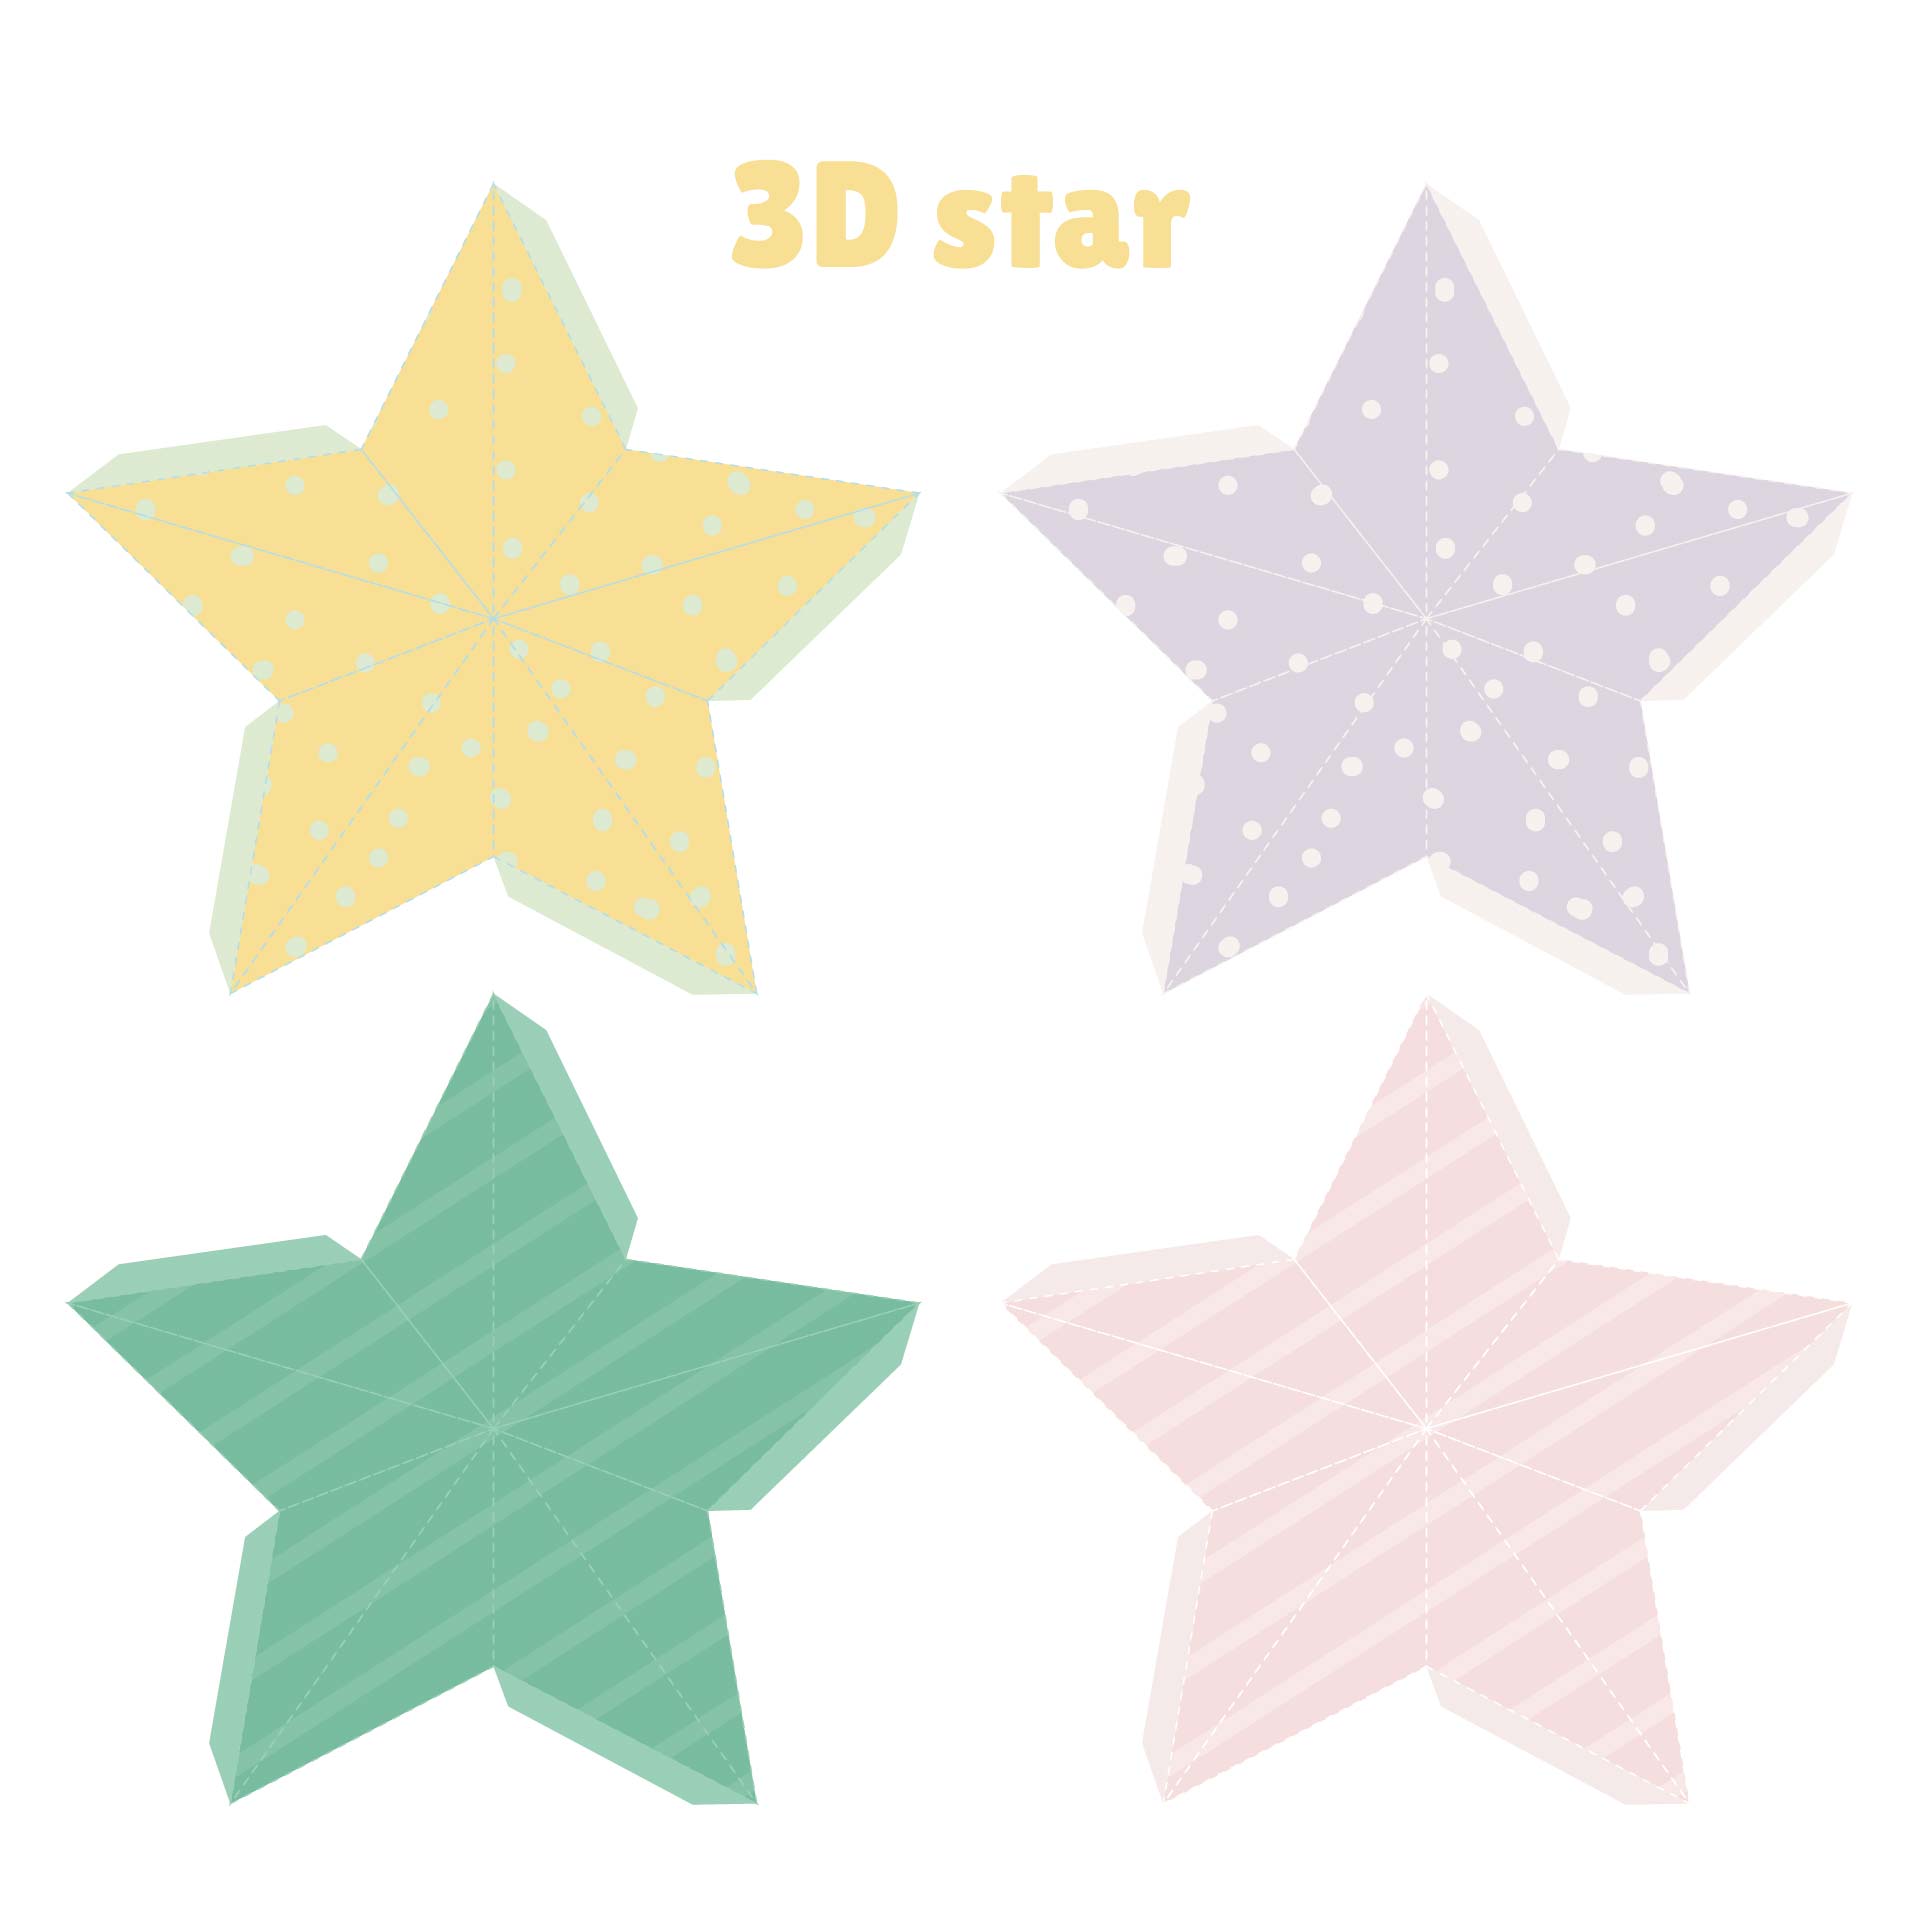 5 Best Images of 3D Star Printable Template 3D Christmas Star